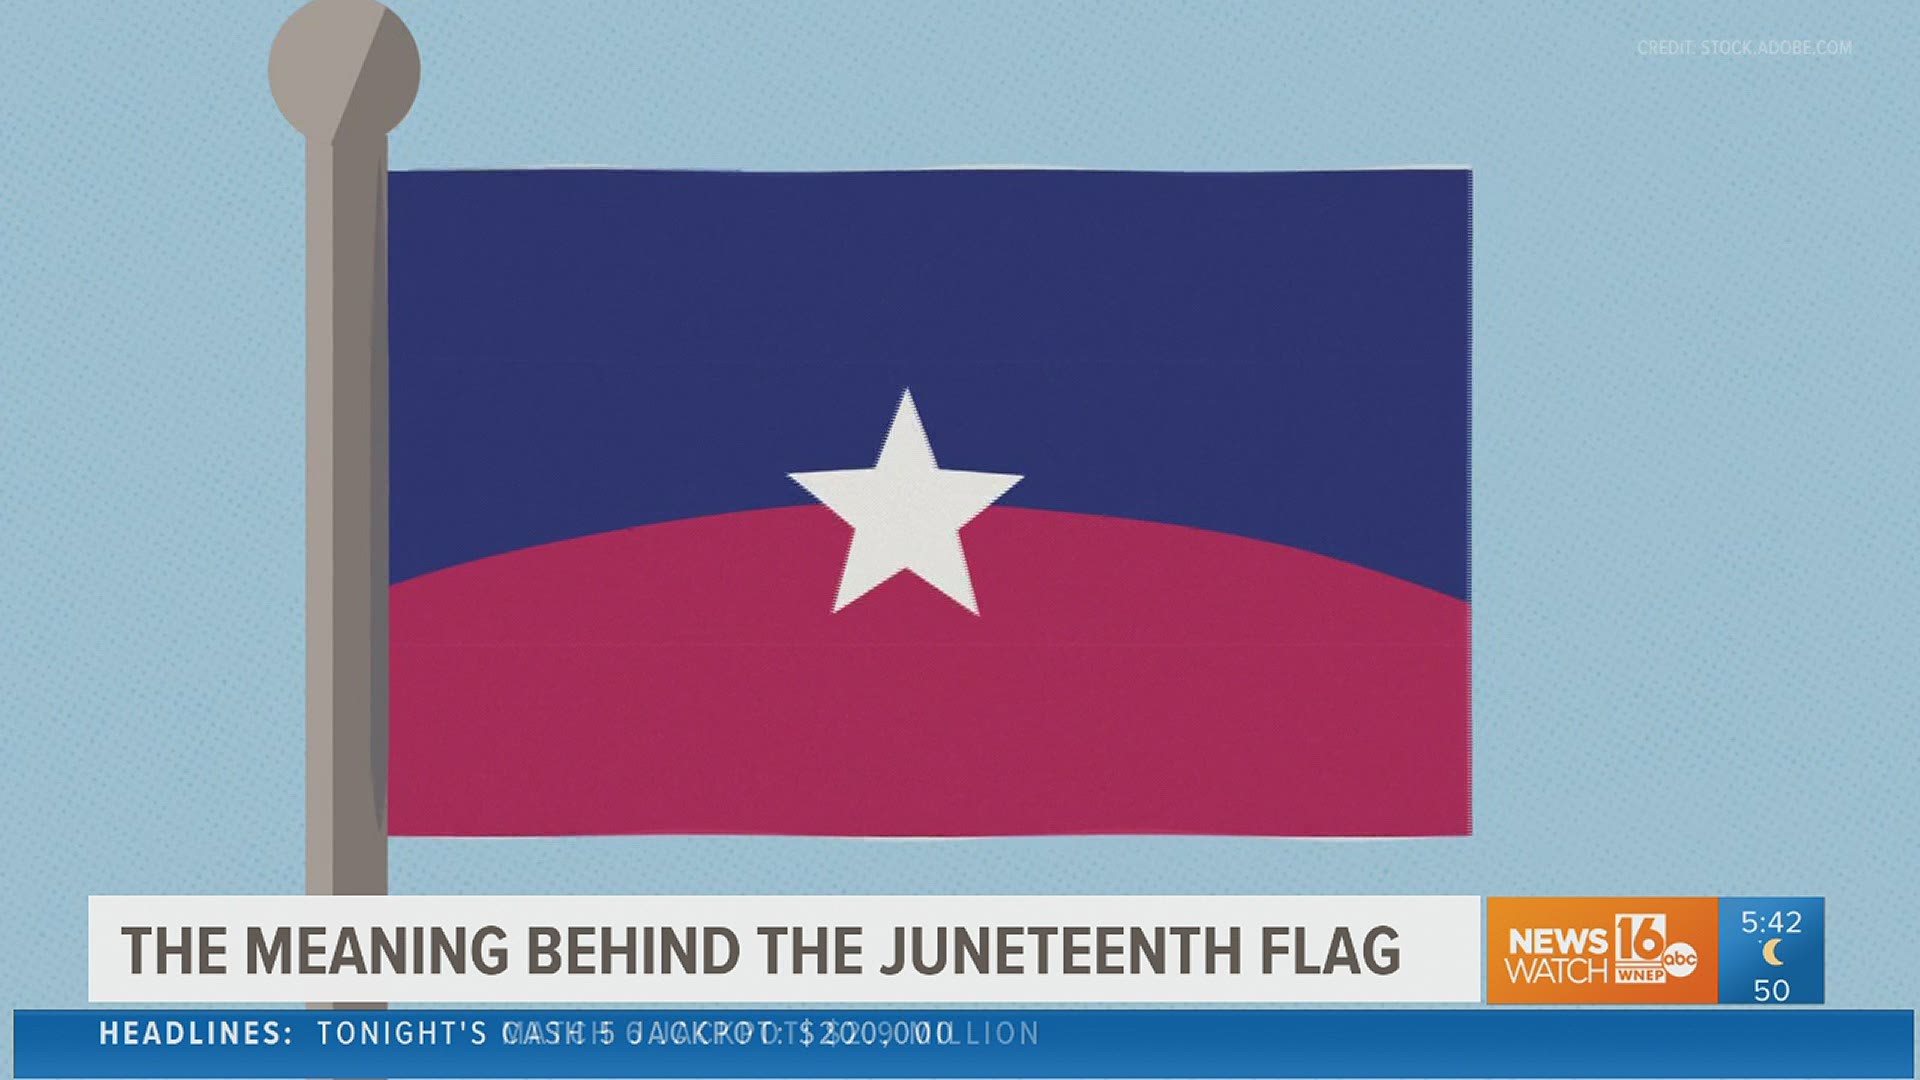 From the history behind Juneteenth to the meaning behind the flag, check out this clip to learn more about both and an upcoming event in Williamsport.